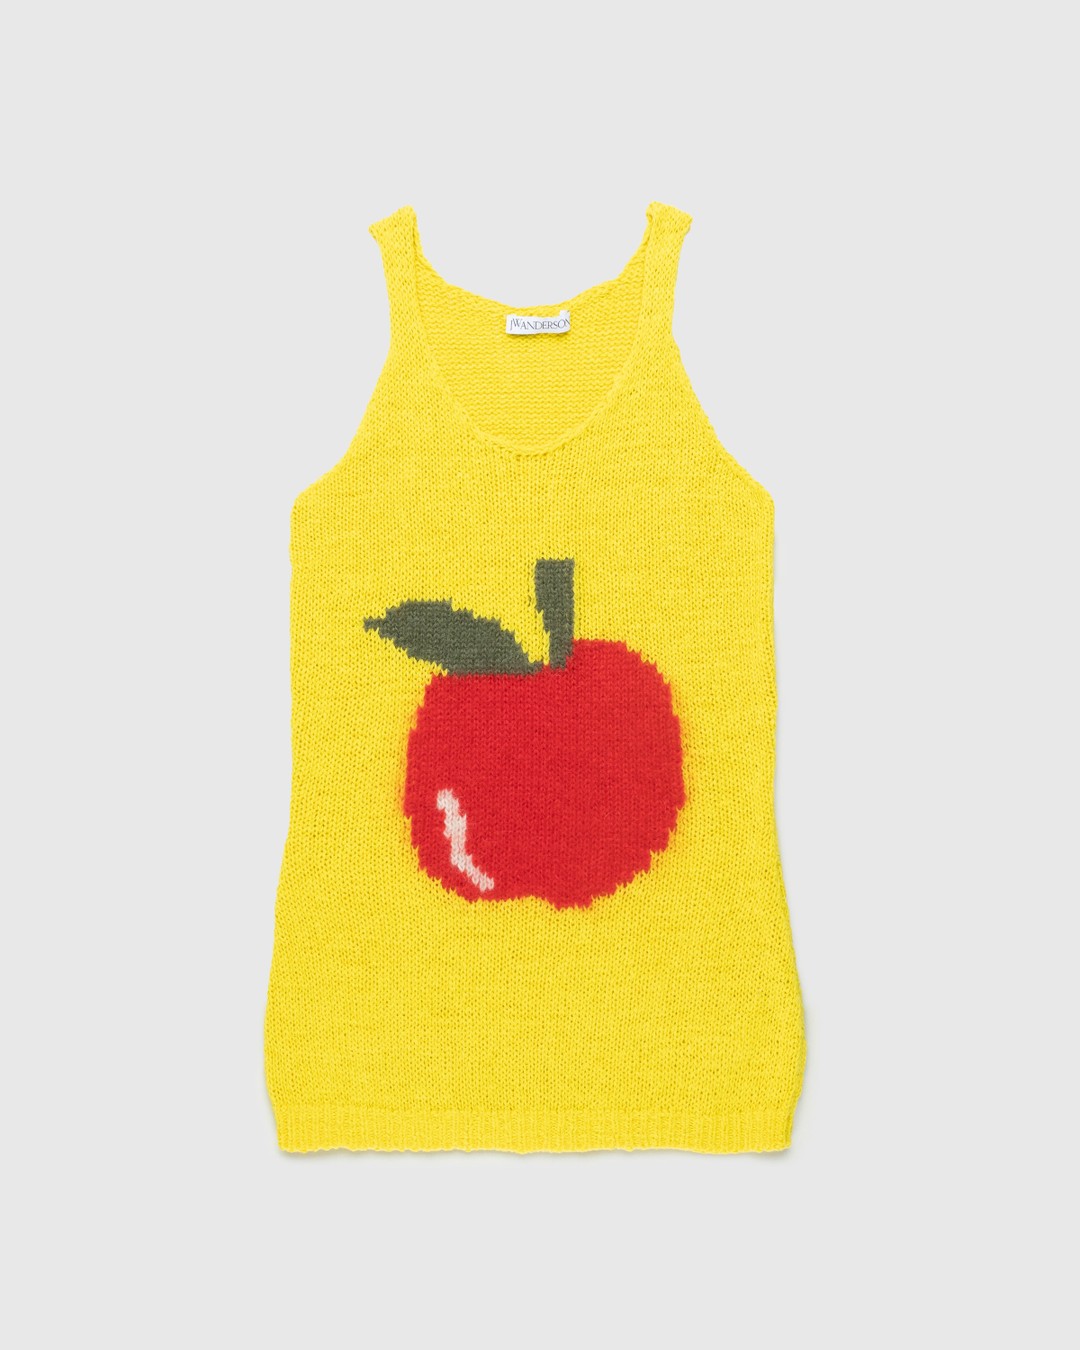 J.W. Anderson – Apple Tank Top Yellow - Tops - Yellow - Image 1